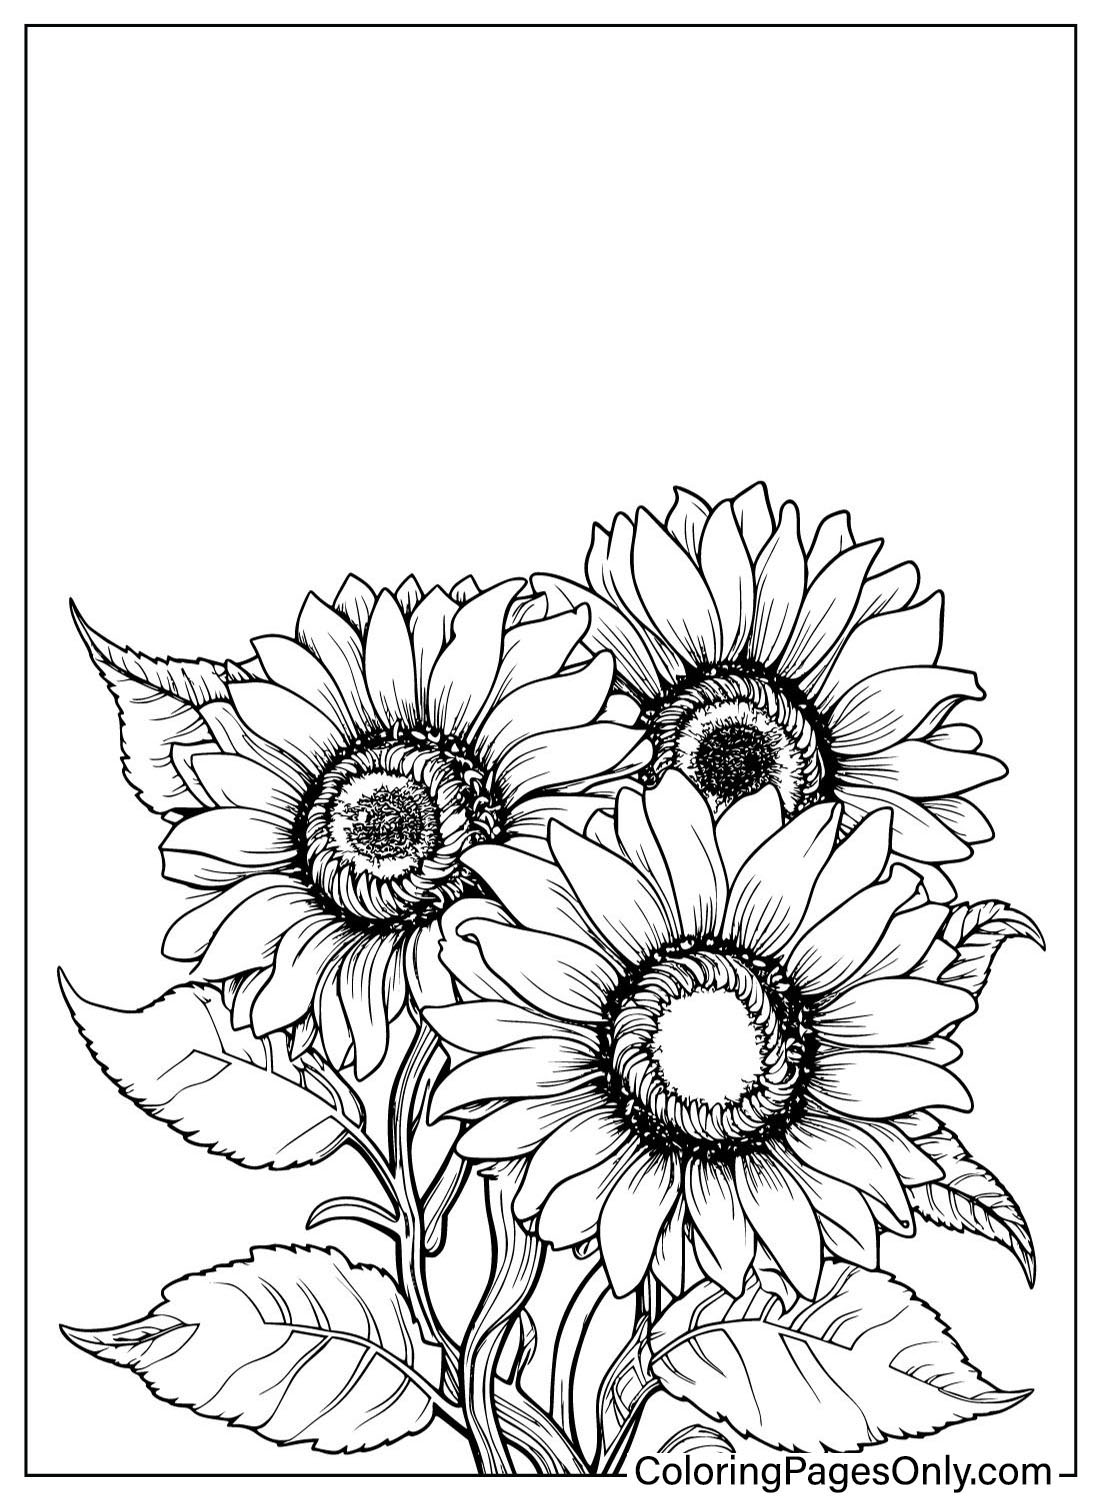 Printable Coloring Page Sunflower